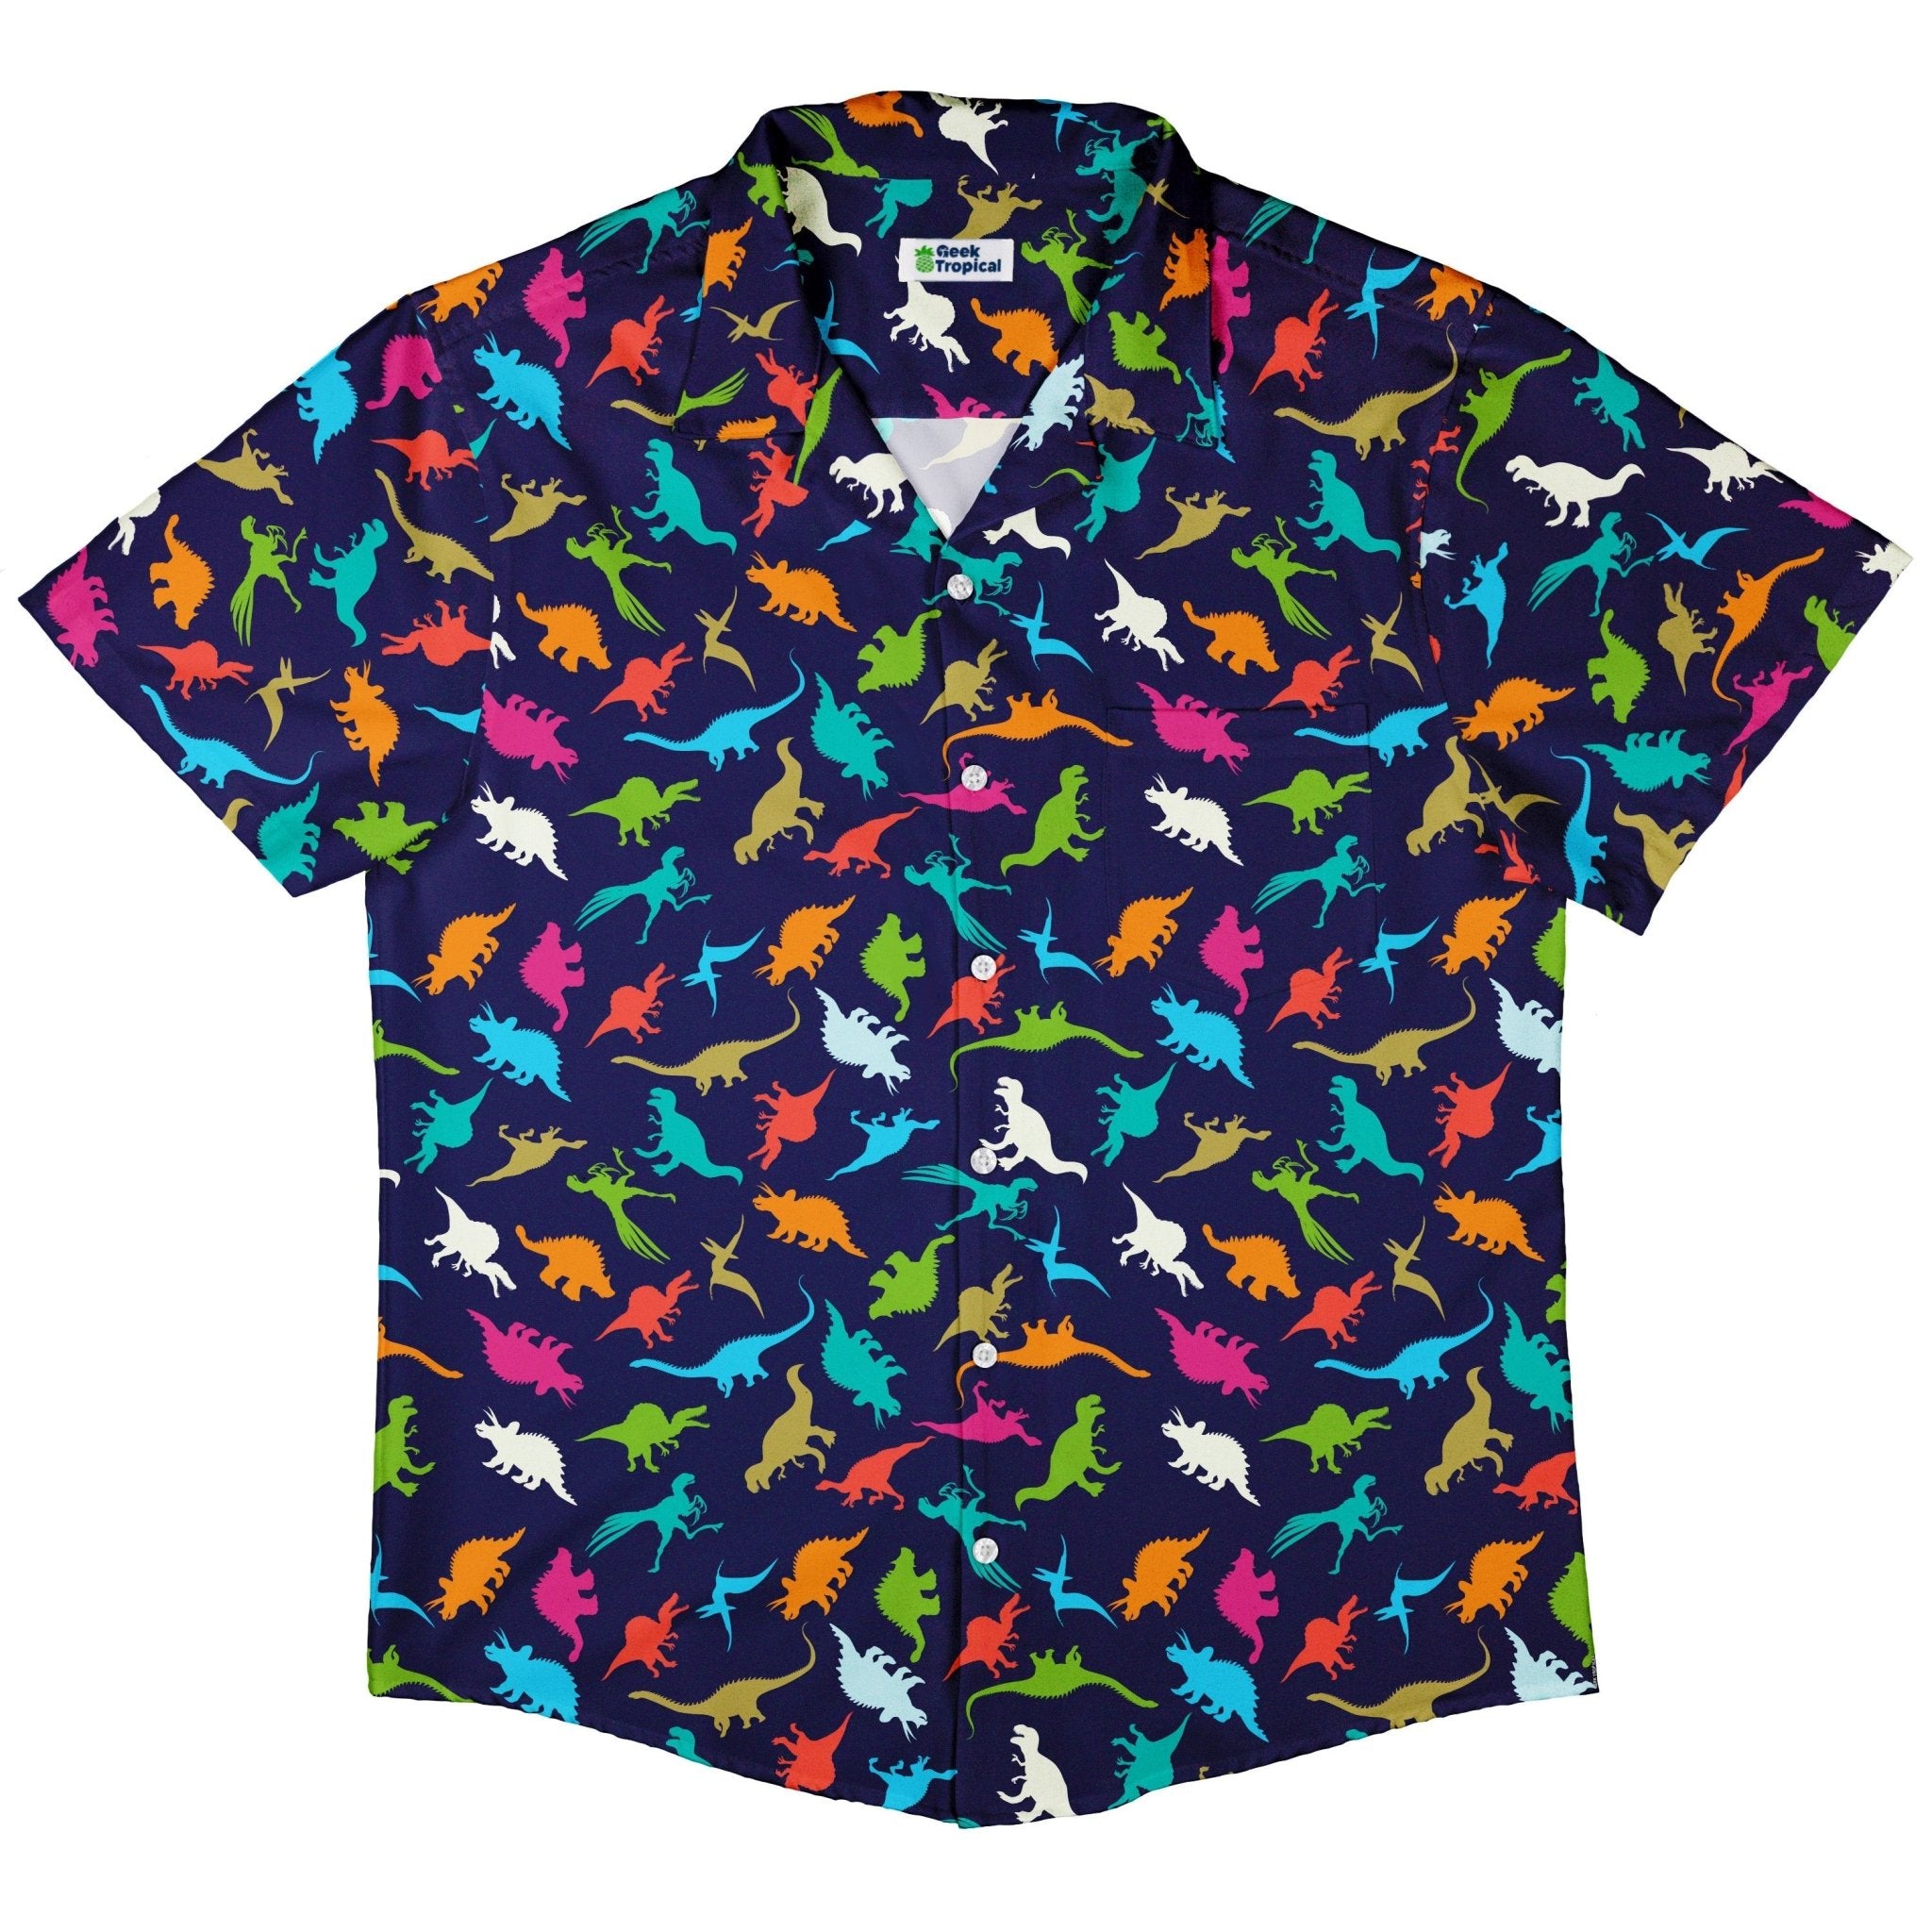 Colorful Dinosaur Silhouettes Navy Button Up Shirt - adult sizing - dinosaur print - Simple Patterns